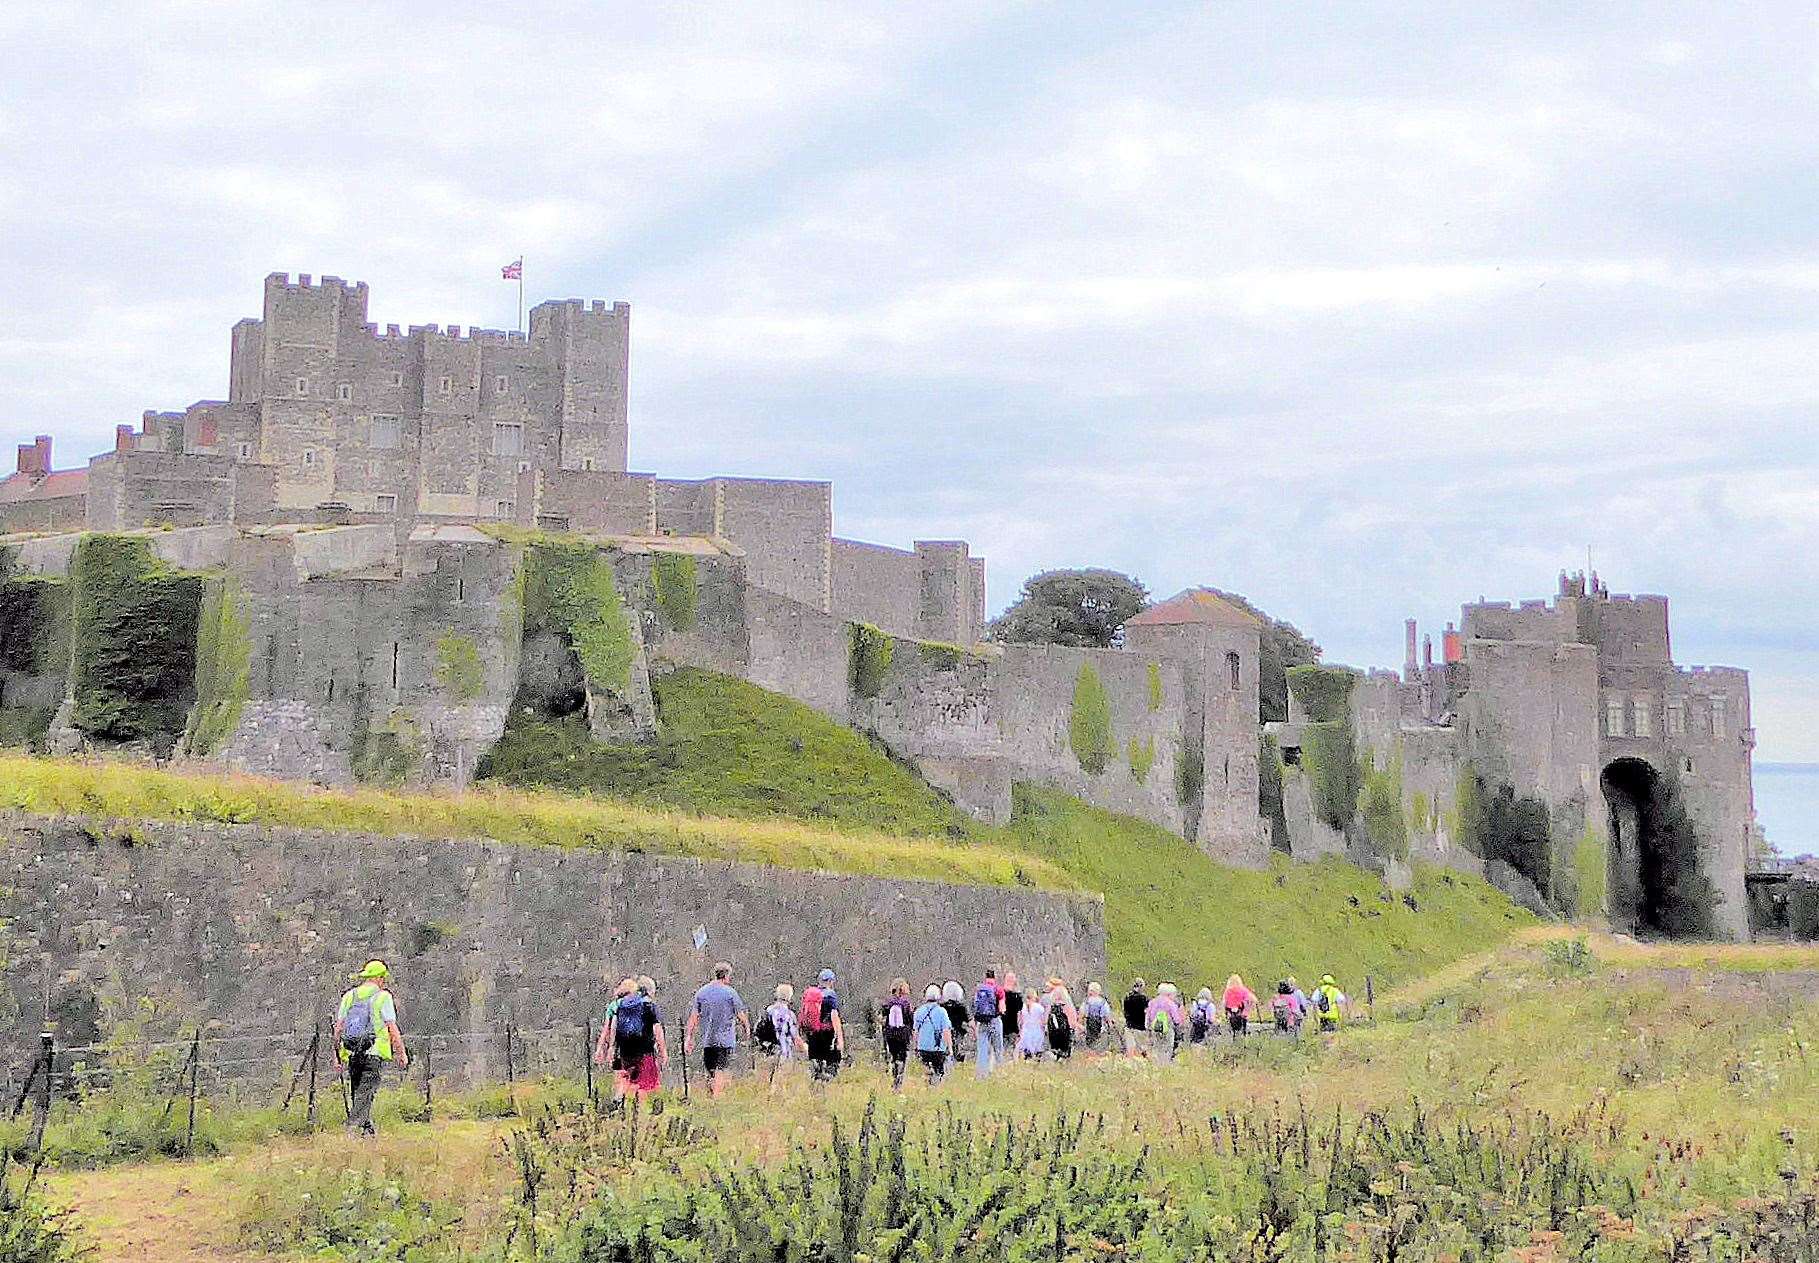 Dover Castle will not light up because it would require additional staff to help facilitate it